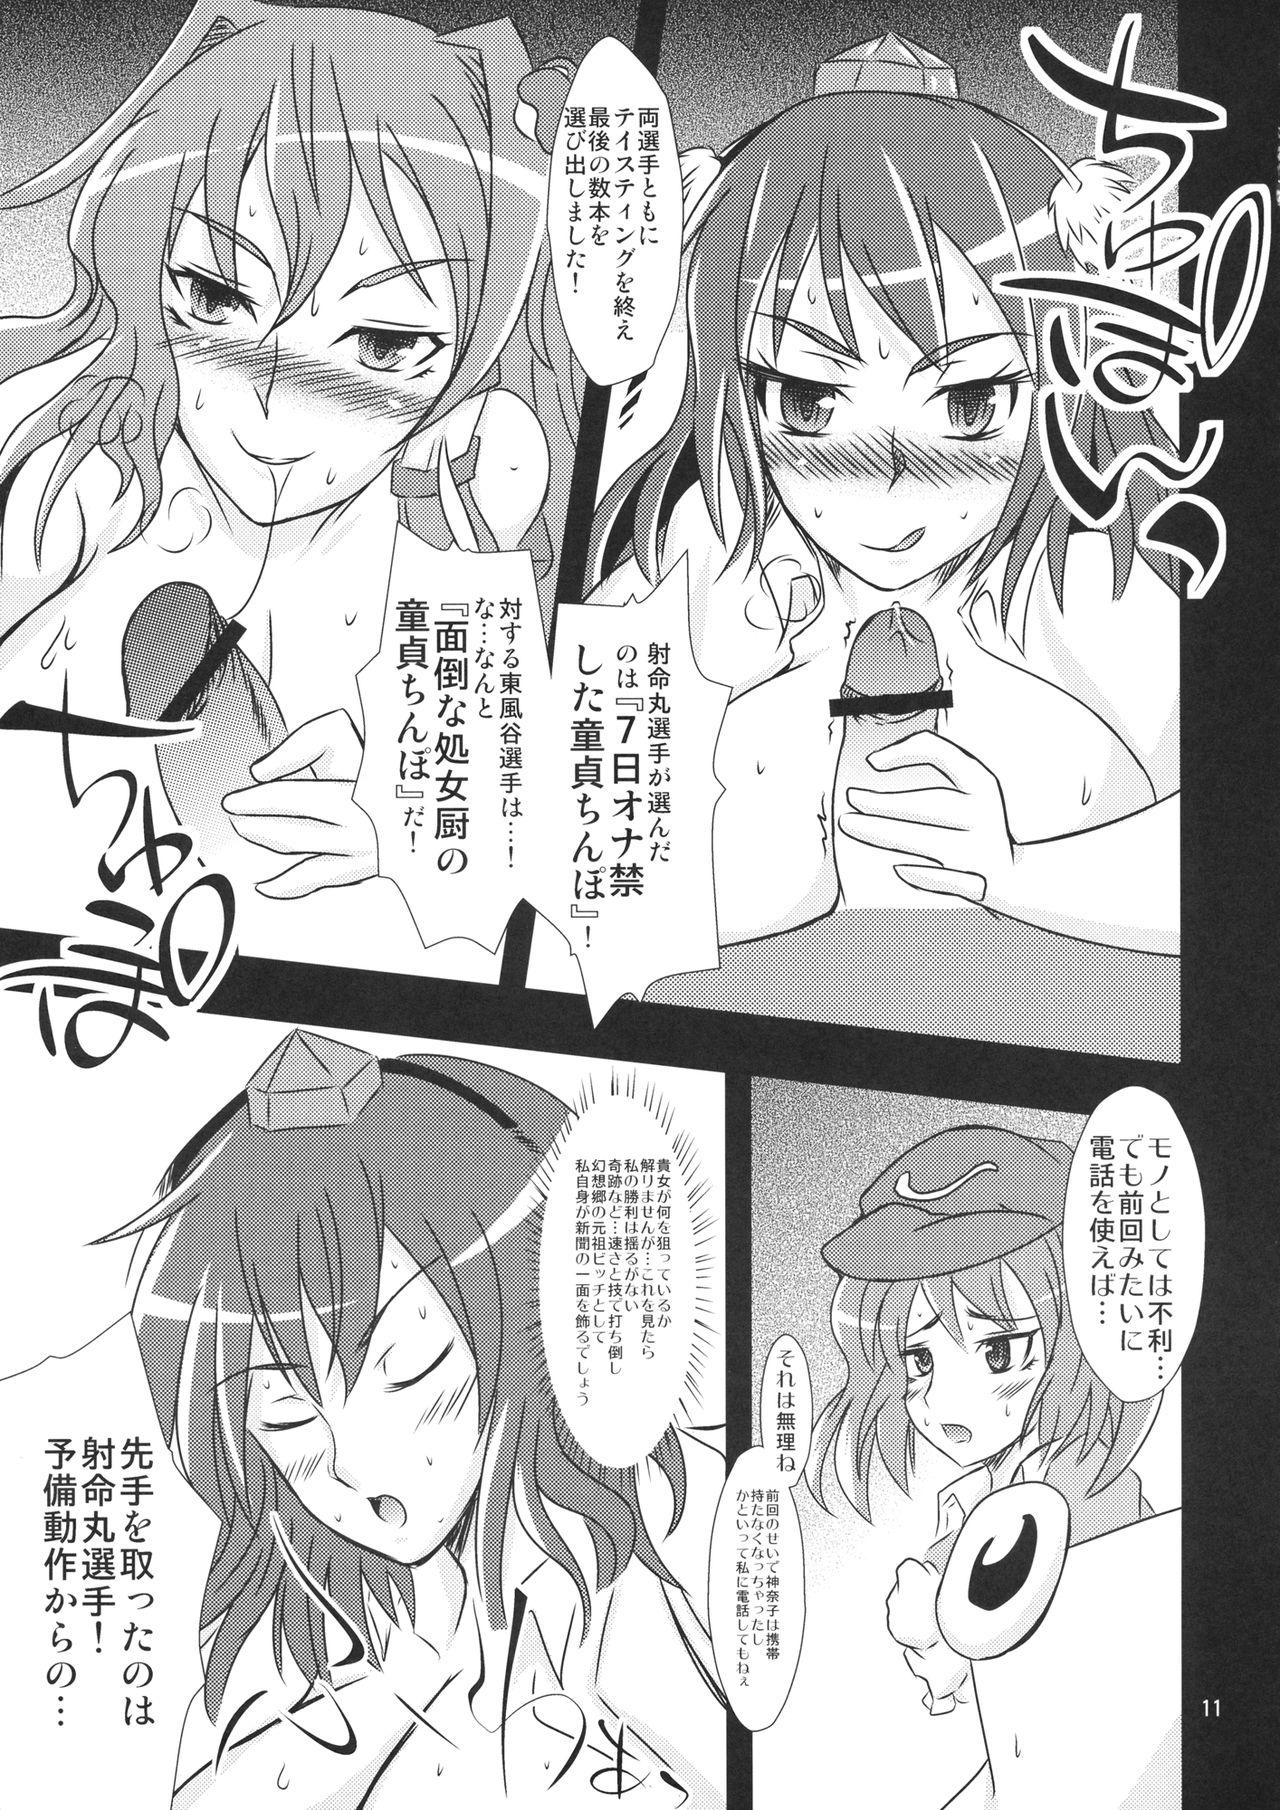 Cumload Aya Bitch VS Sana Bitch - Touhou project 18 Year Old Porn - Page 10